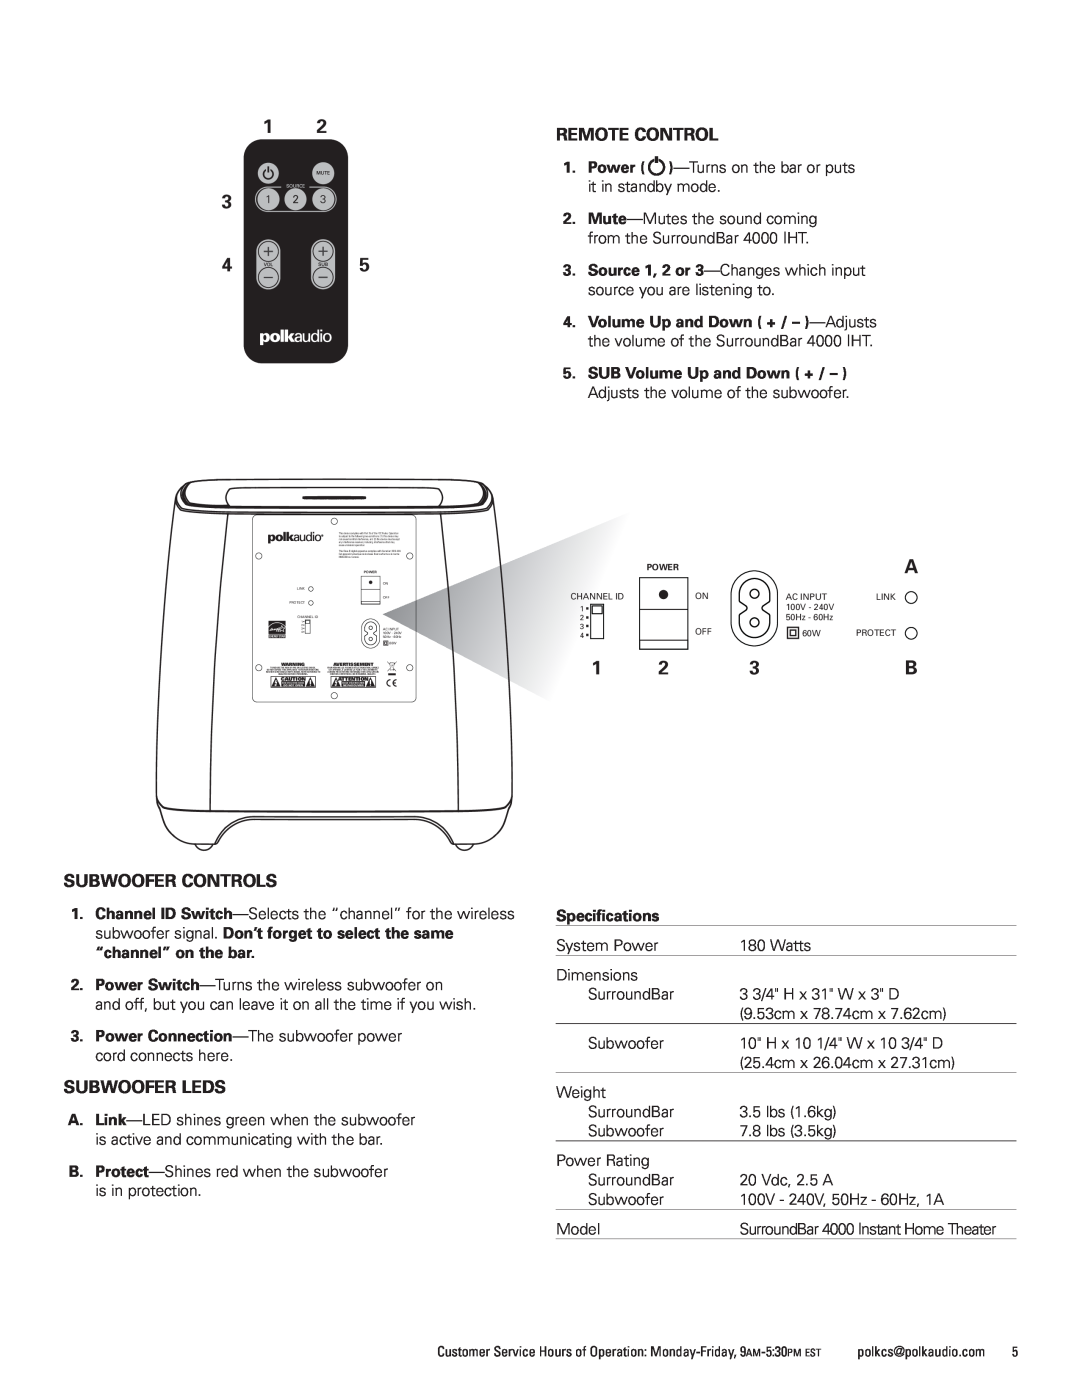 Polk Audio 4000 manual Subwoofer Controls, Subwoofer Leds, Remote Control, Specifications 